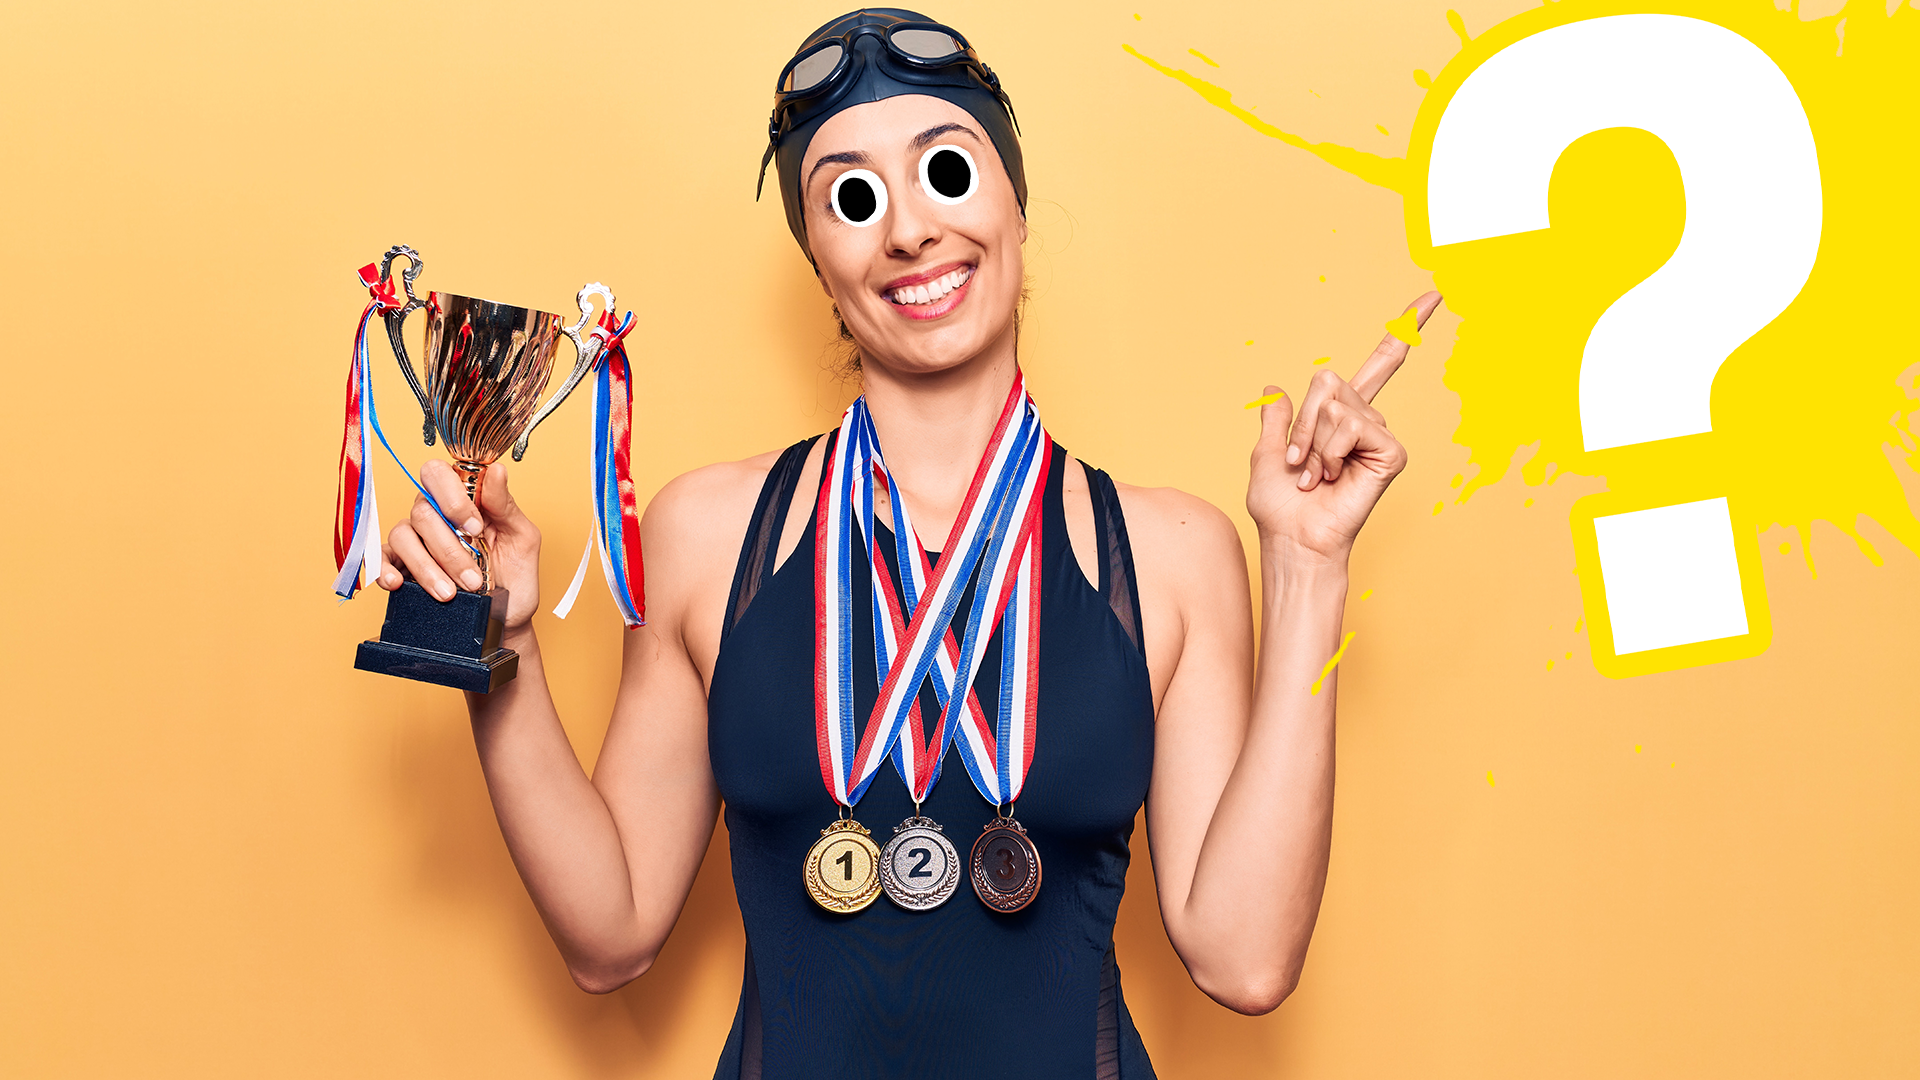 Female swimmer with medals and trophy on orange background with yellow question mark 